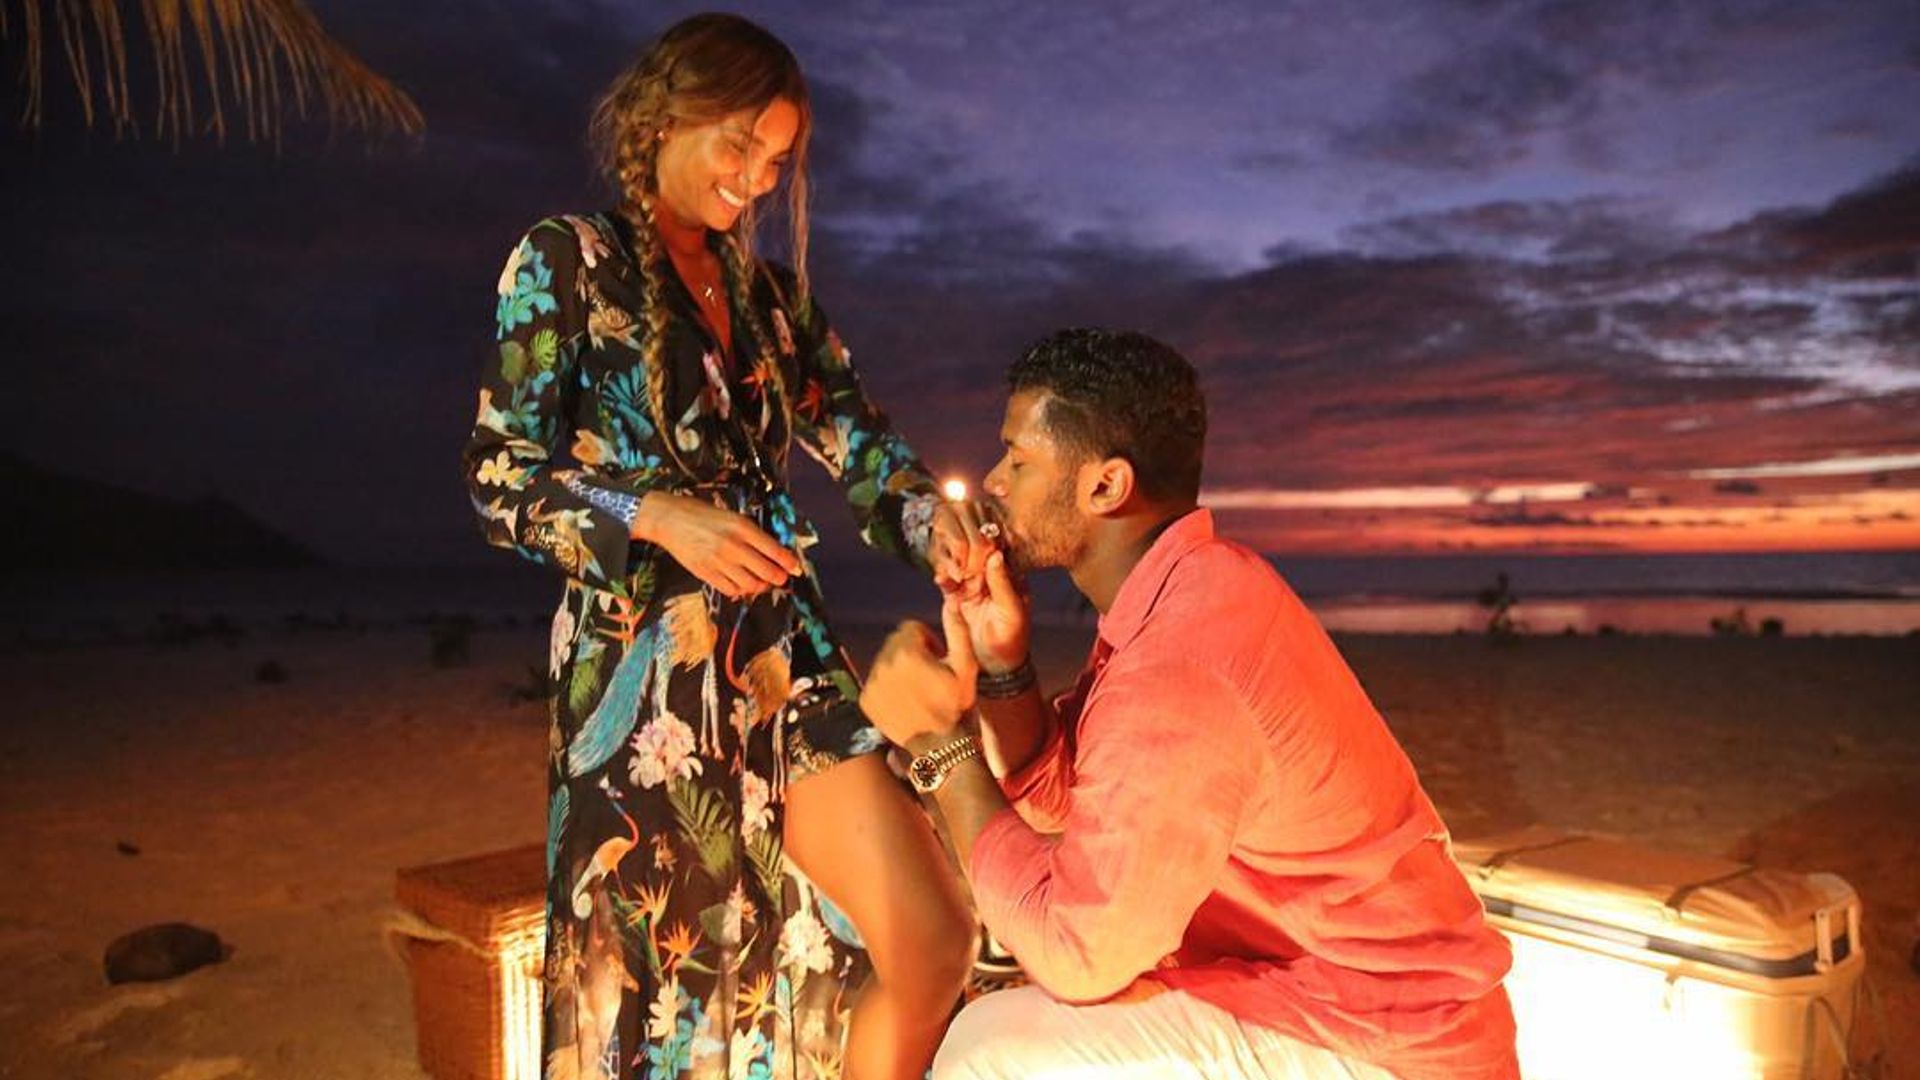 Russell kneeing on a beach, holding Ciara's hand and kissing it after he proposed, she is smiling